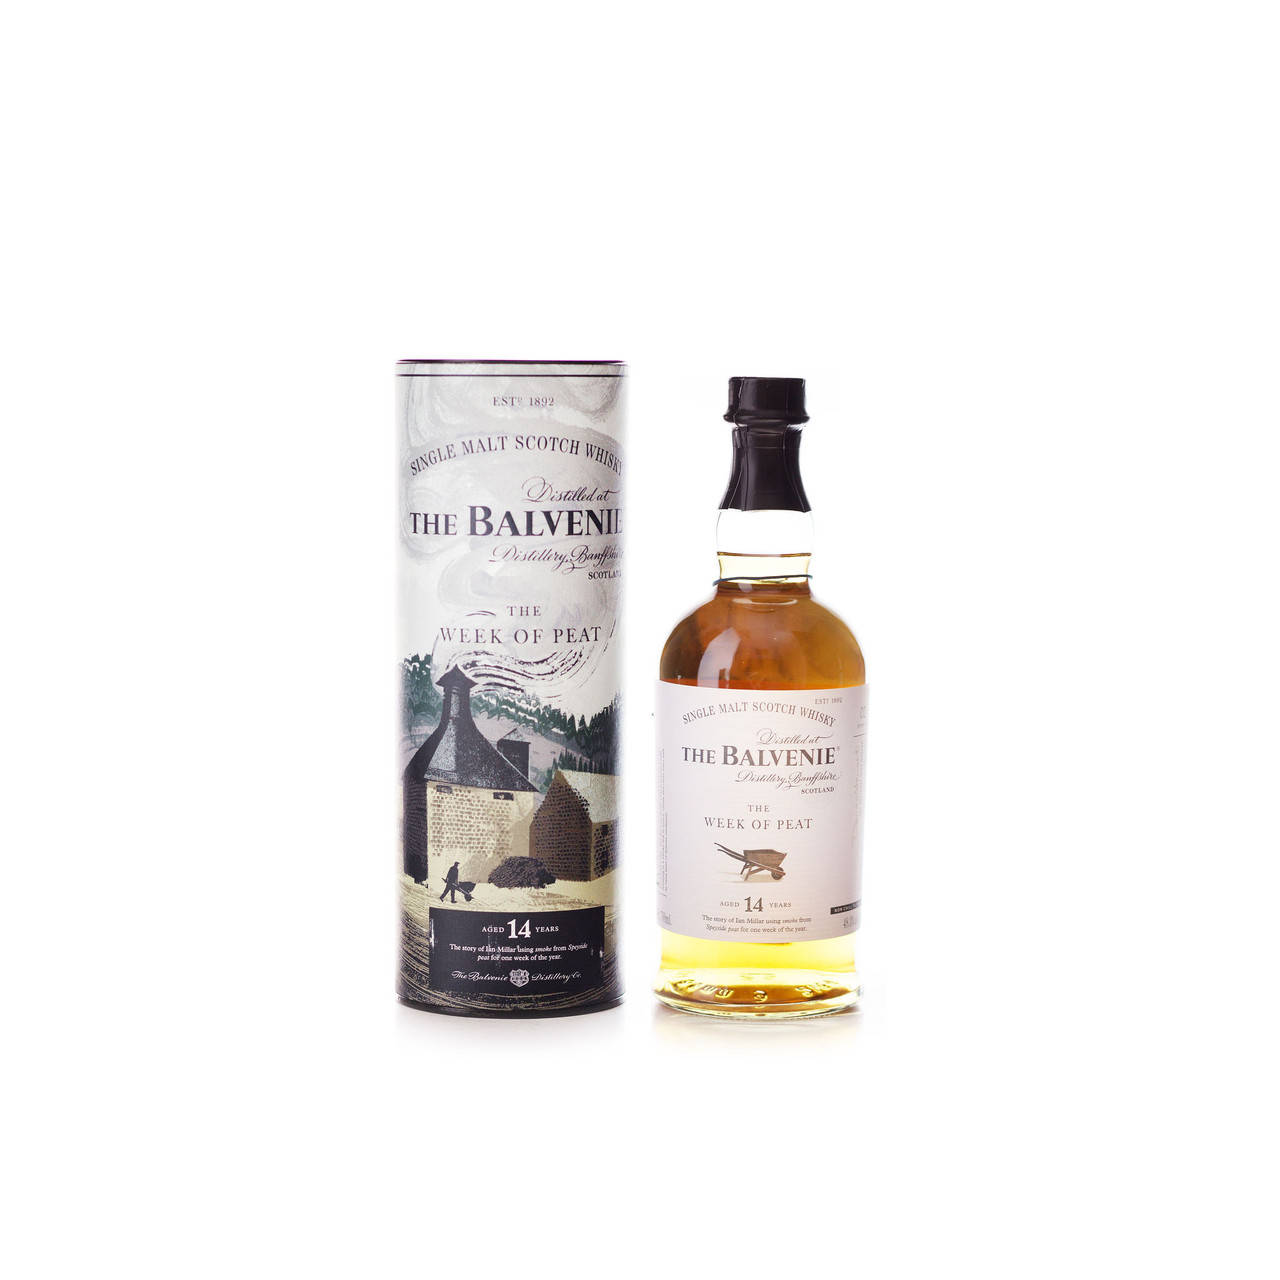 The Balvenie The Week Of Peat Wallpaper